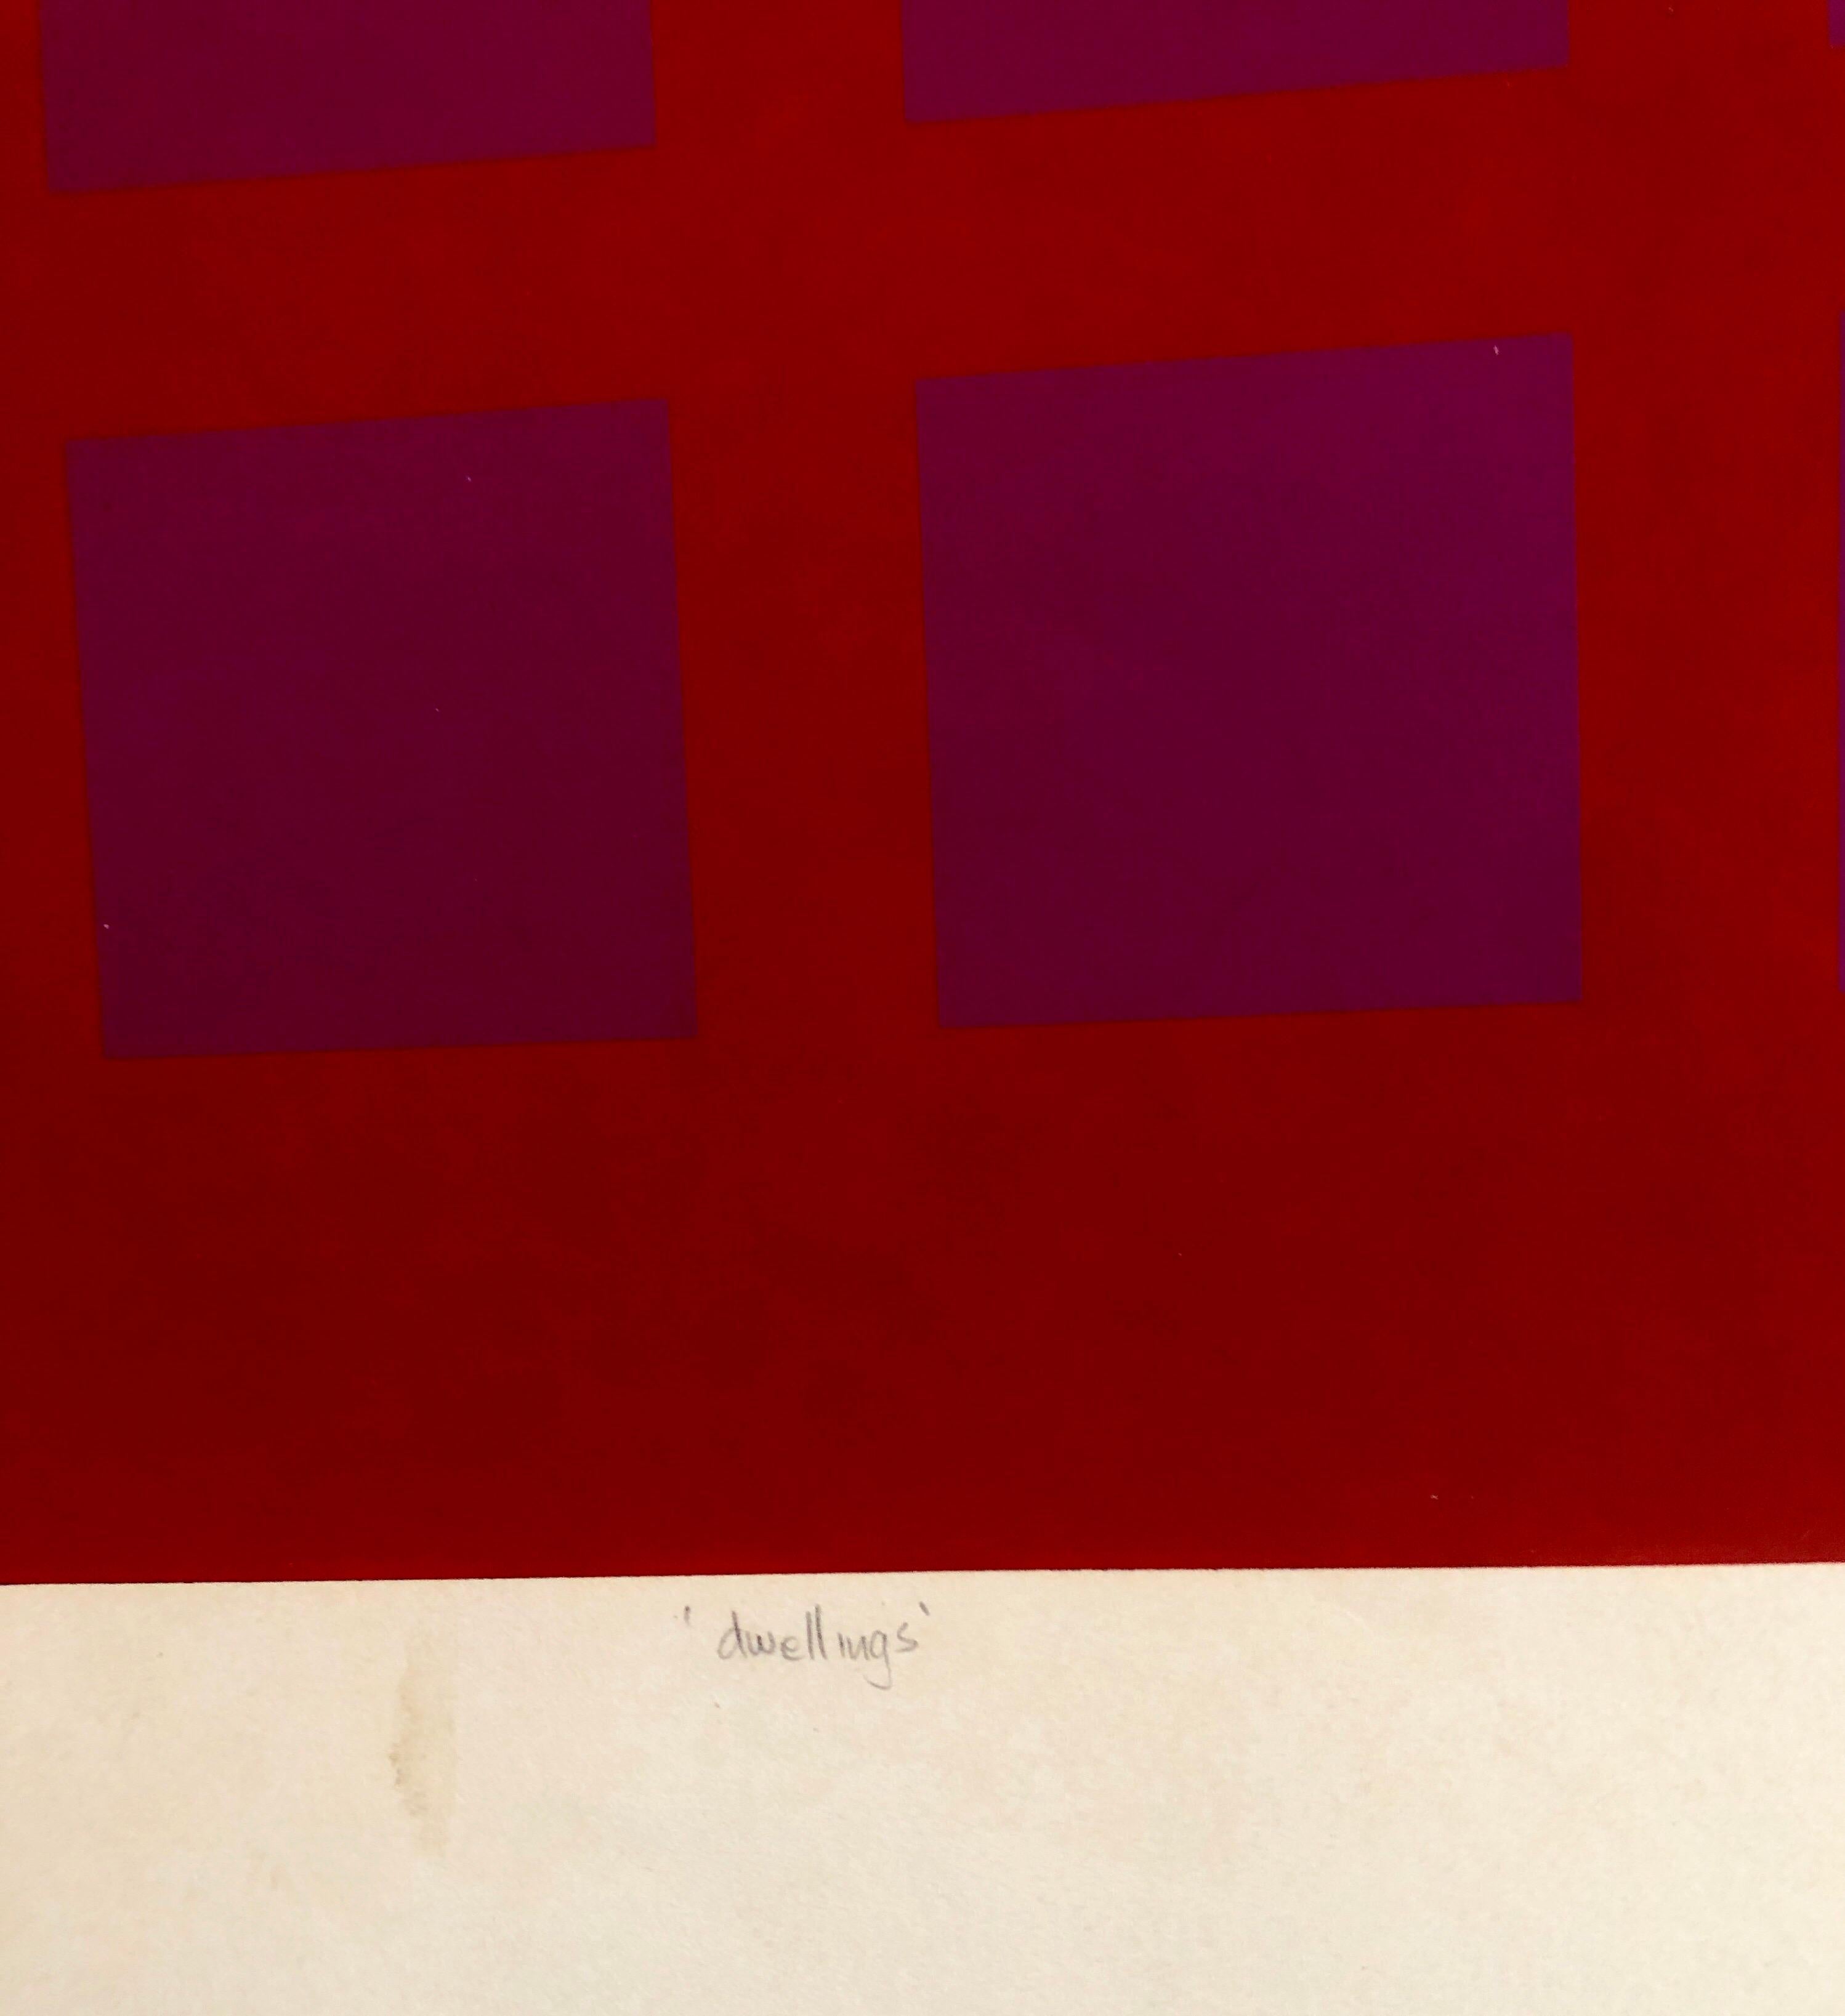 Abstract Geometric 1970s Kinetic Silkscreen Screen Print Manner Vasarely Op Art - Red Abstract Print by Paul M. Levy